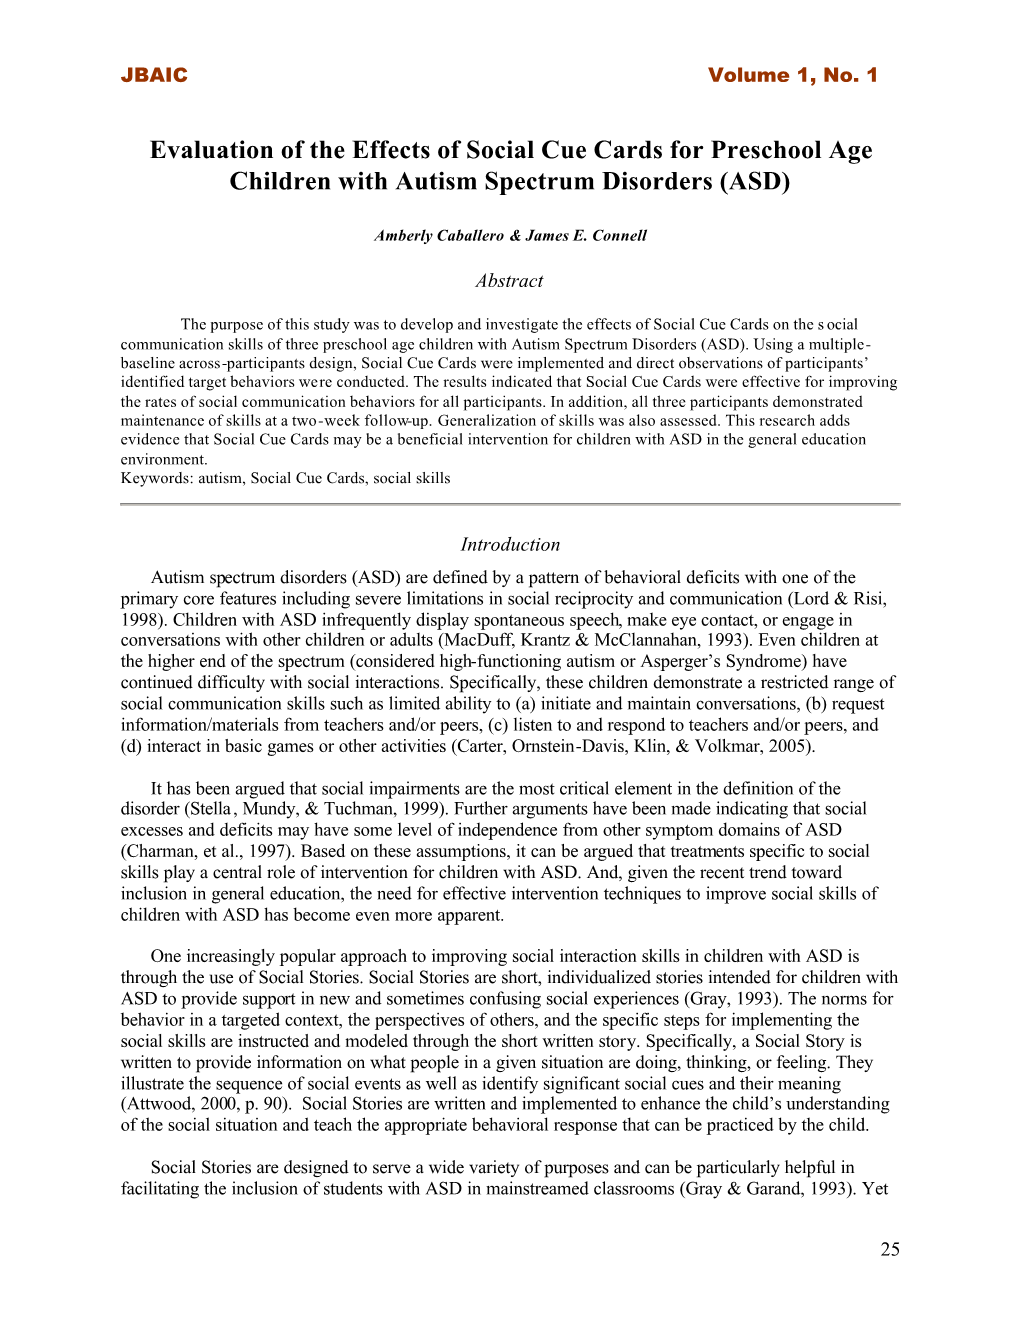 Evaluation of the Effects of Social Cue Cards for Preschool Age Children with Autism Spectrum Disorders (ASD)